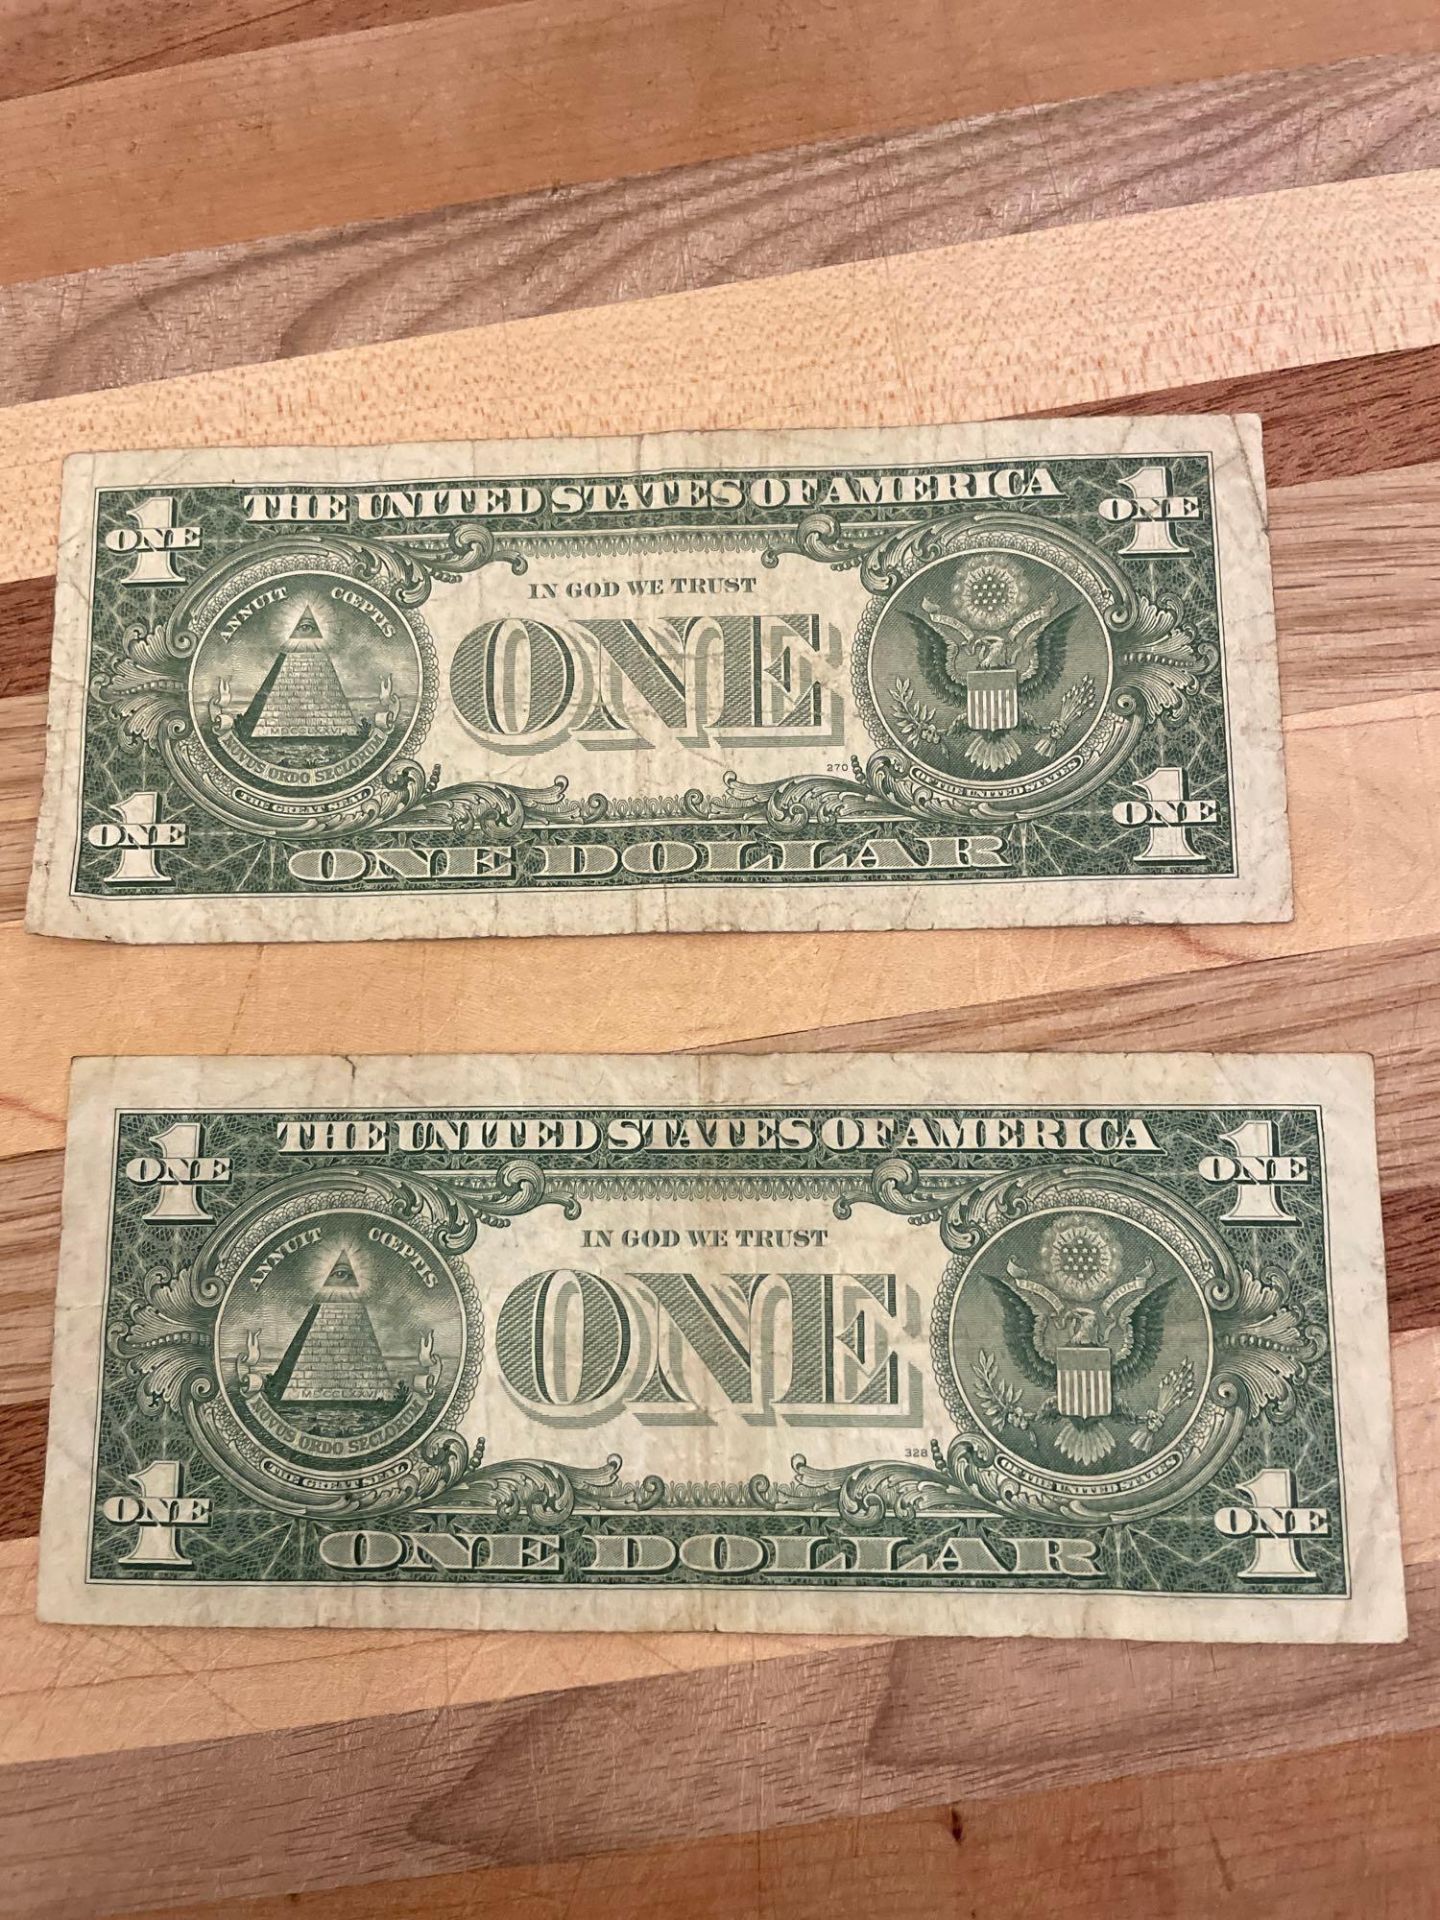 (2) 1957 $1 Silver Certificates - Image 3 of 3